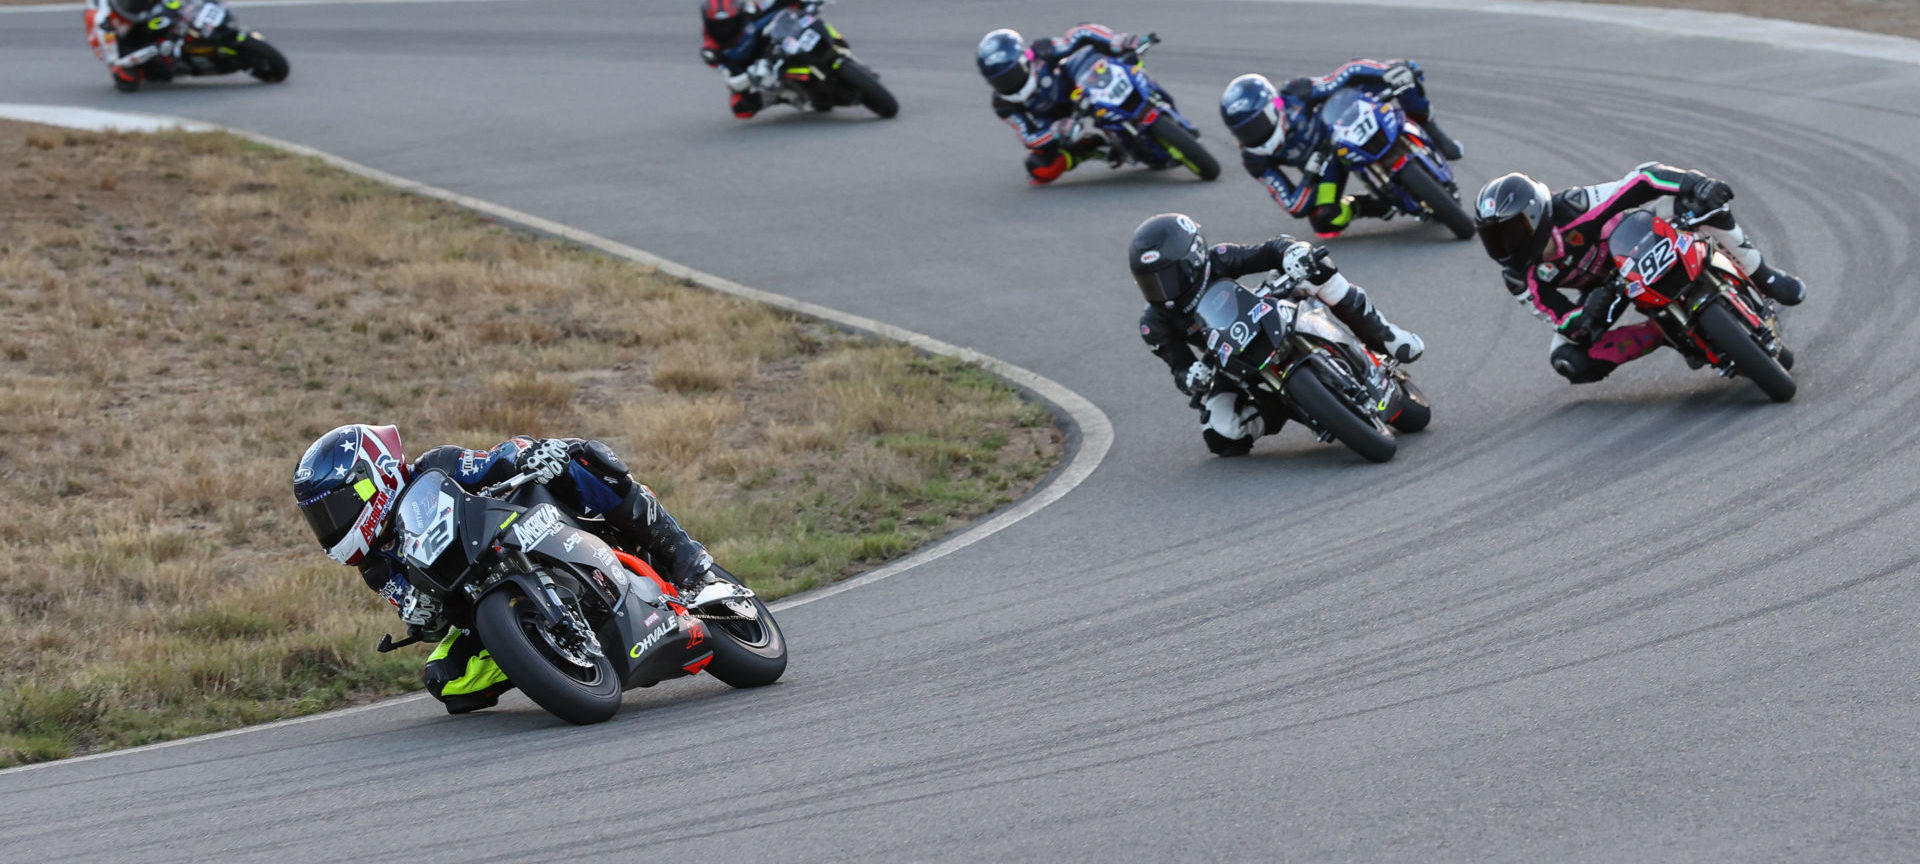 Mini Cup racers Travis Horn (12), Jesse James Shedden (9), Rossi Moor (92), Kayla Yaakov (31), and Julian Correa (40) in action at Ridge Motorsports Park in 2020. Photo by Brian J. Nelson.